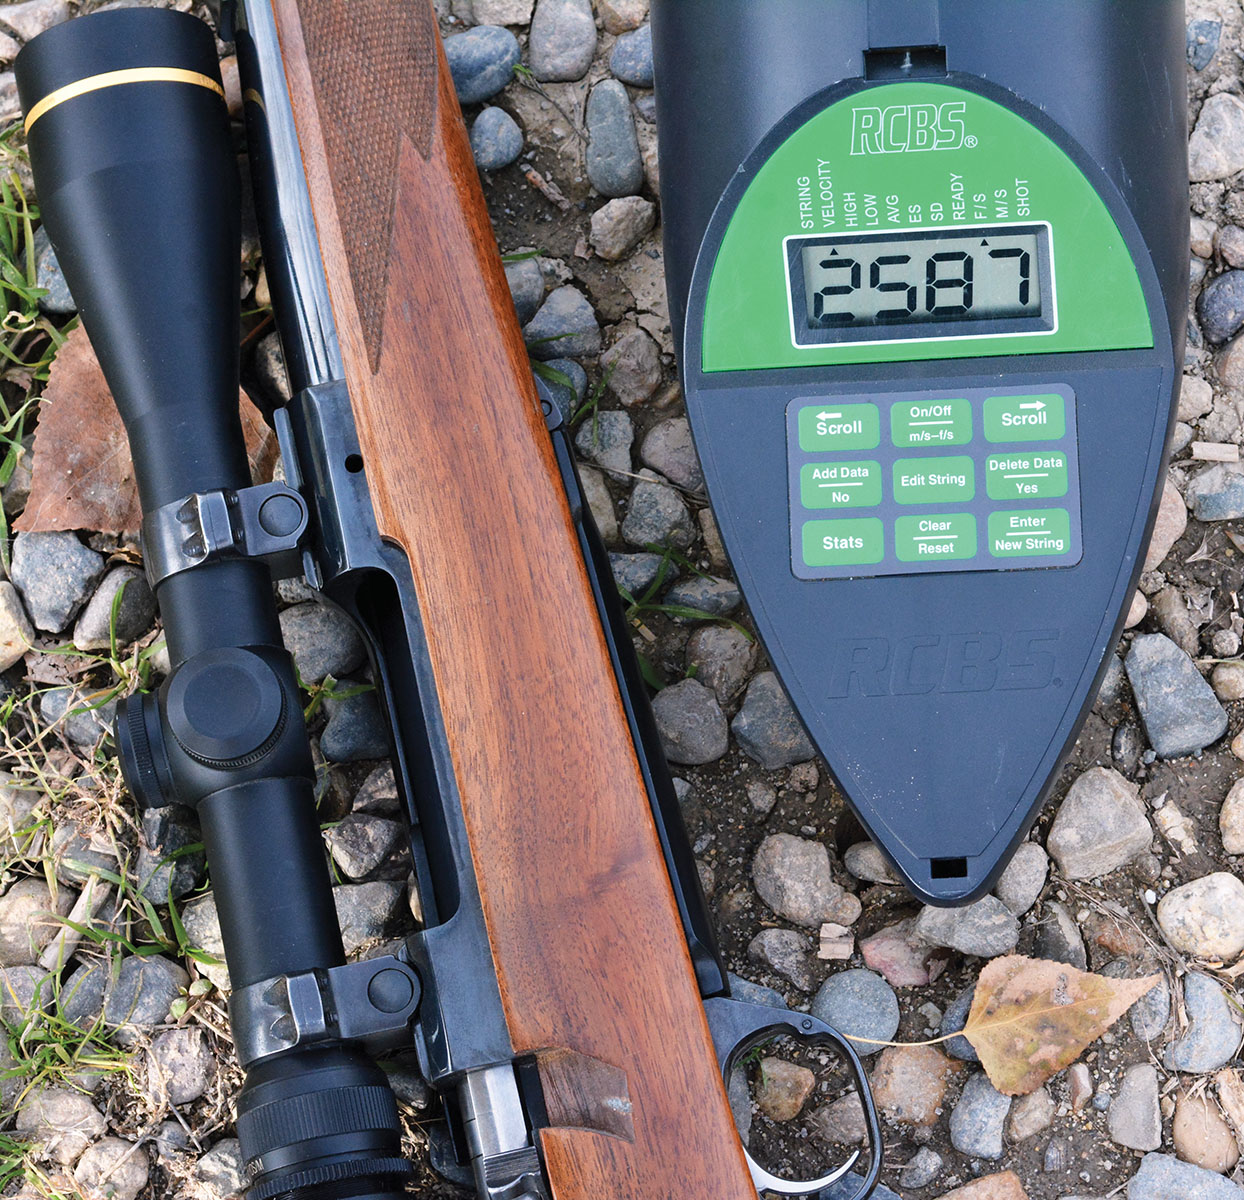 Handloads were checked for velocity on an RCBS chronograph.